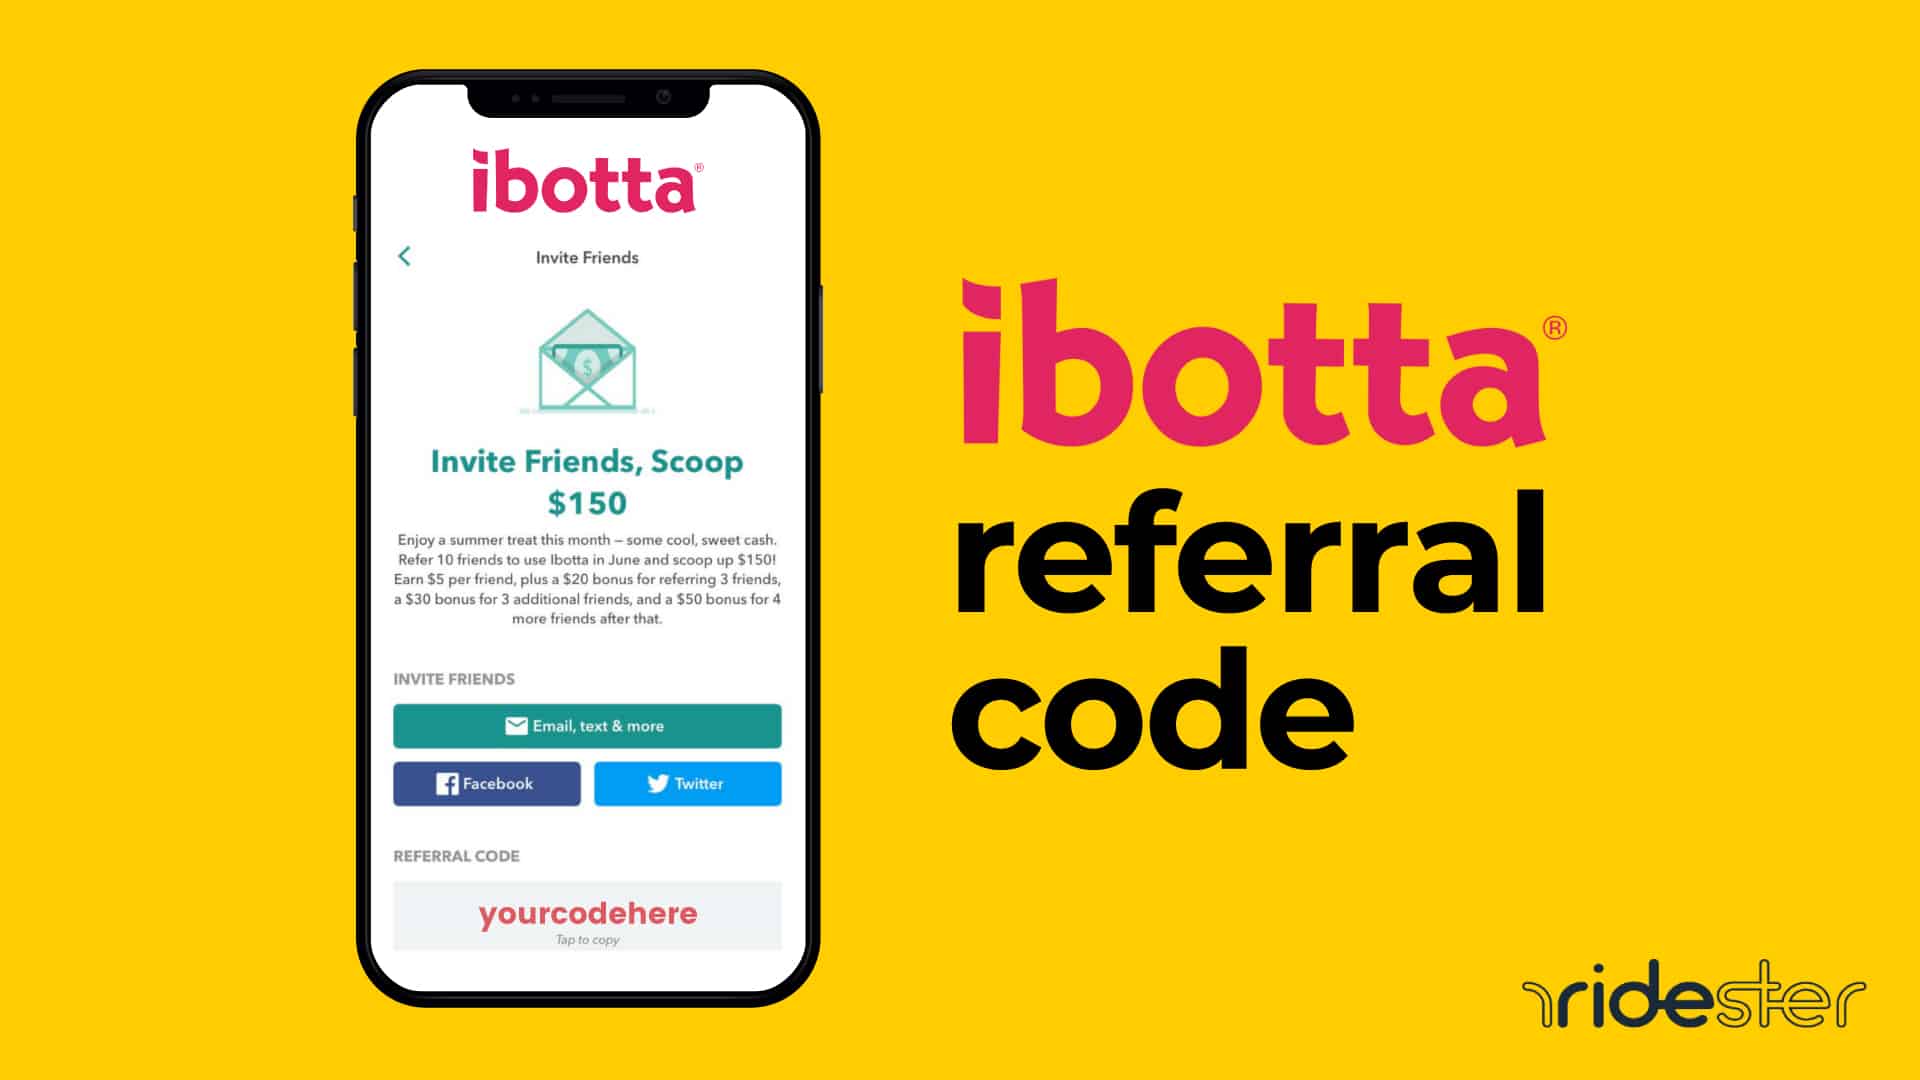 vector illustration of a phone running the ibotta app, with an ibotta promotion on the screen. Next to the phone is block text that reads "ibotta referral code"